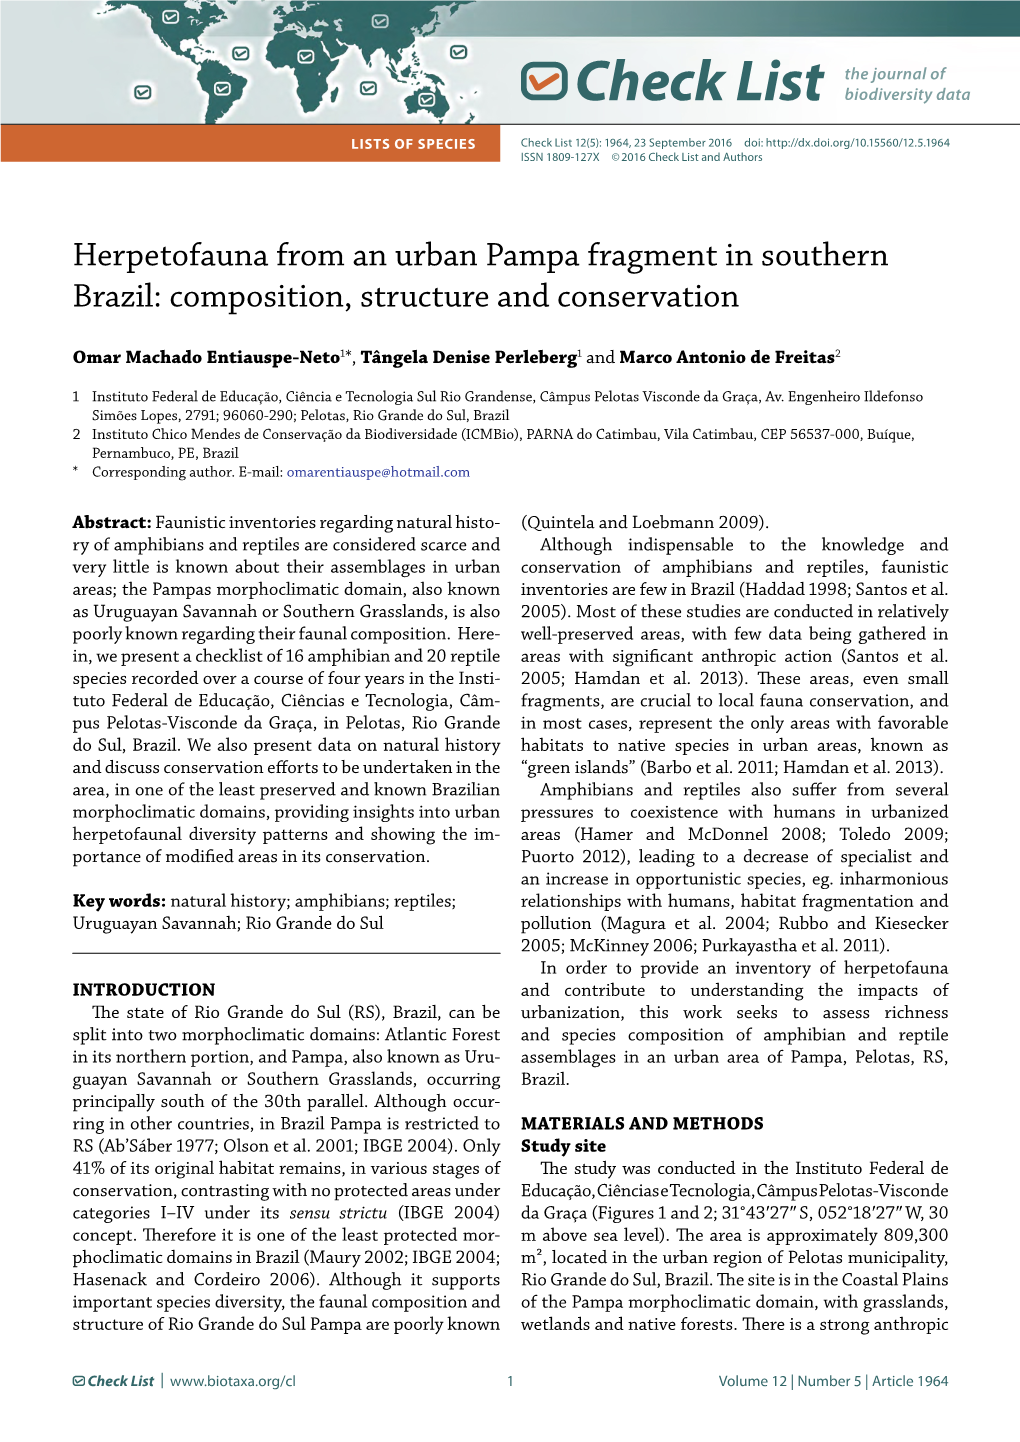 Herpetofauna from an Urban Pampa Fragment in Southern Brazil: Composition, Structure and Conservation